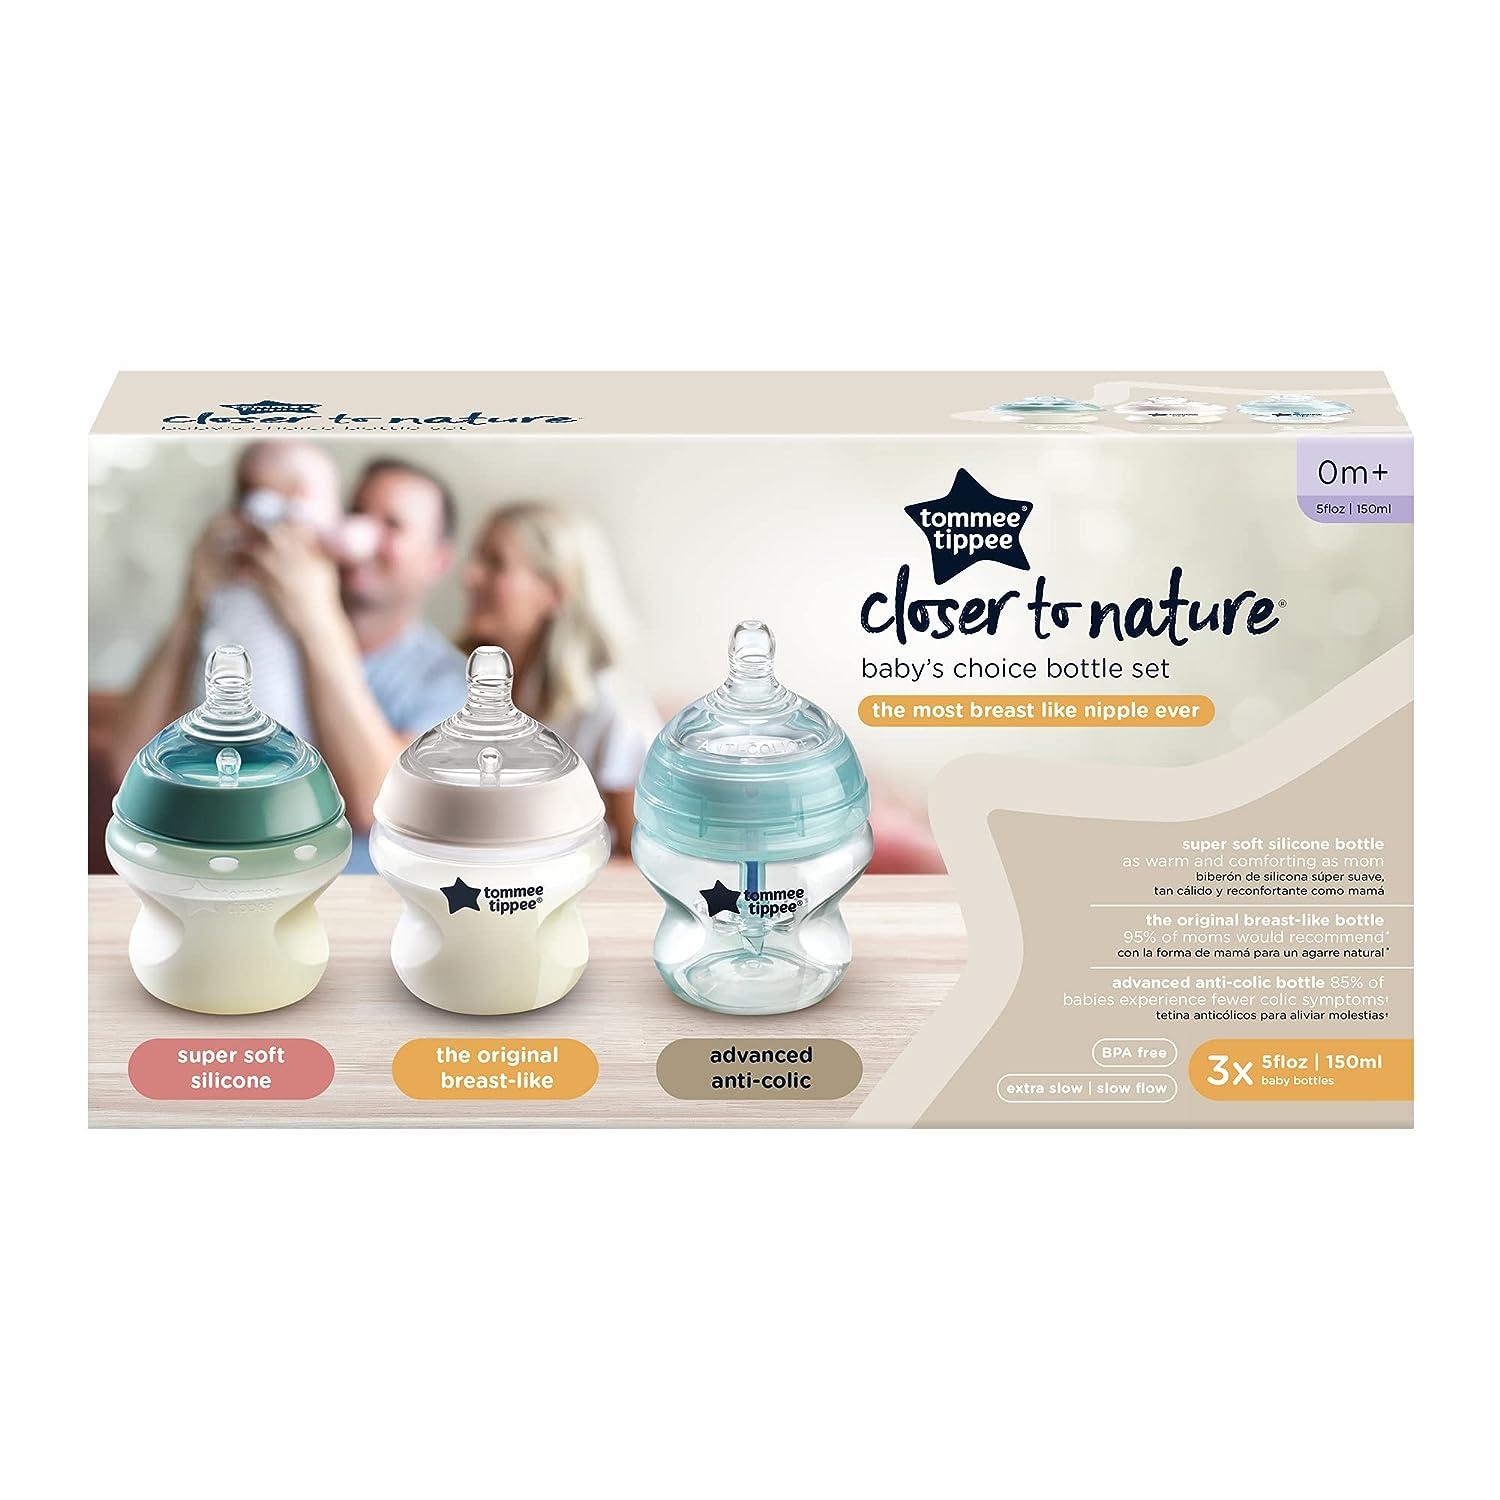 Tommee Tippee Closer to Nature 1 x 150ml Bottle